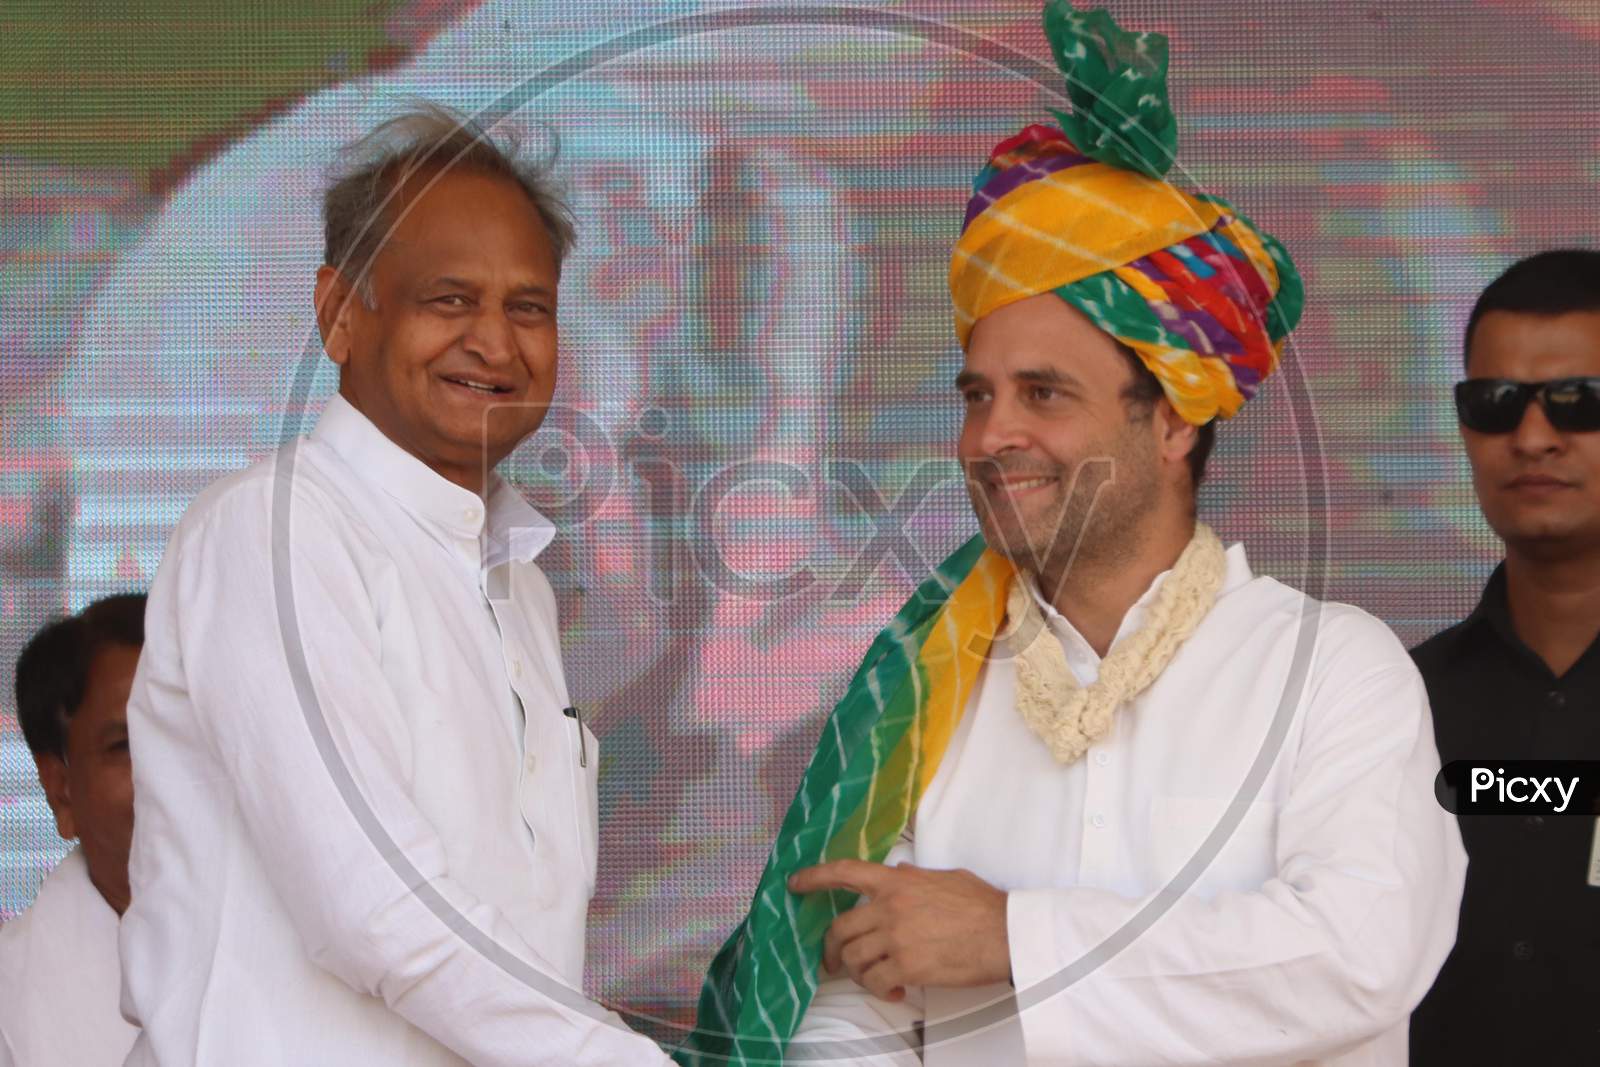 Rahul Gandhi, President of Indian National Congress(INC) with Ashok Gehlot, Chief Minister of Rajasthan during an election campaign in a village near Ajmer, Rajasthan on April 25, 2019